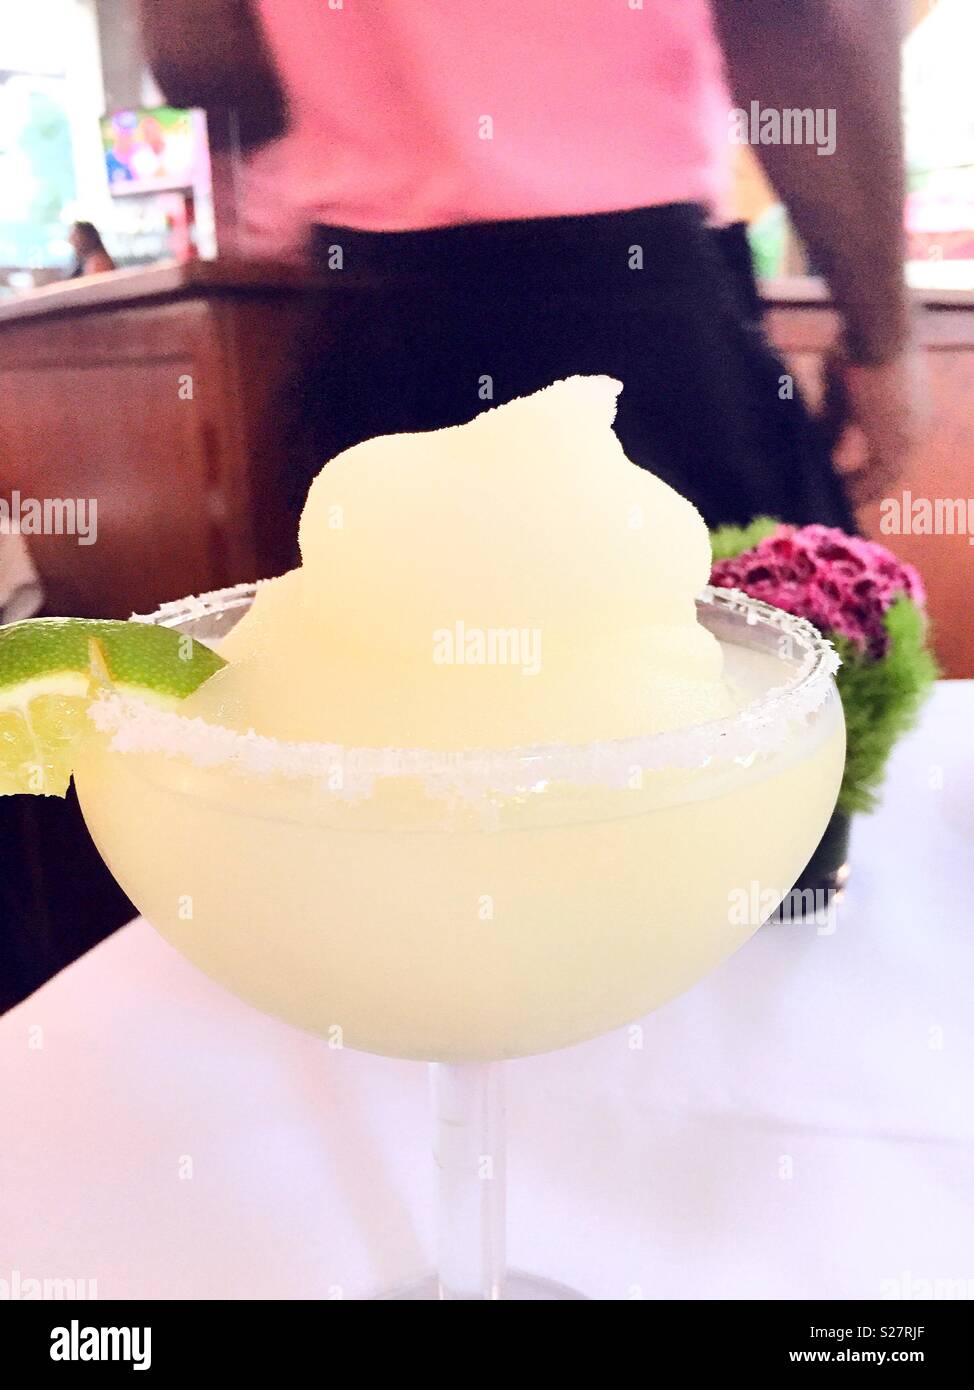 A frozen margarita is served by a waiter in a restaurant, USA Stock Photo